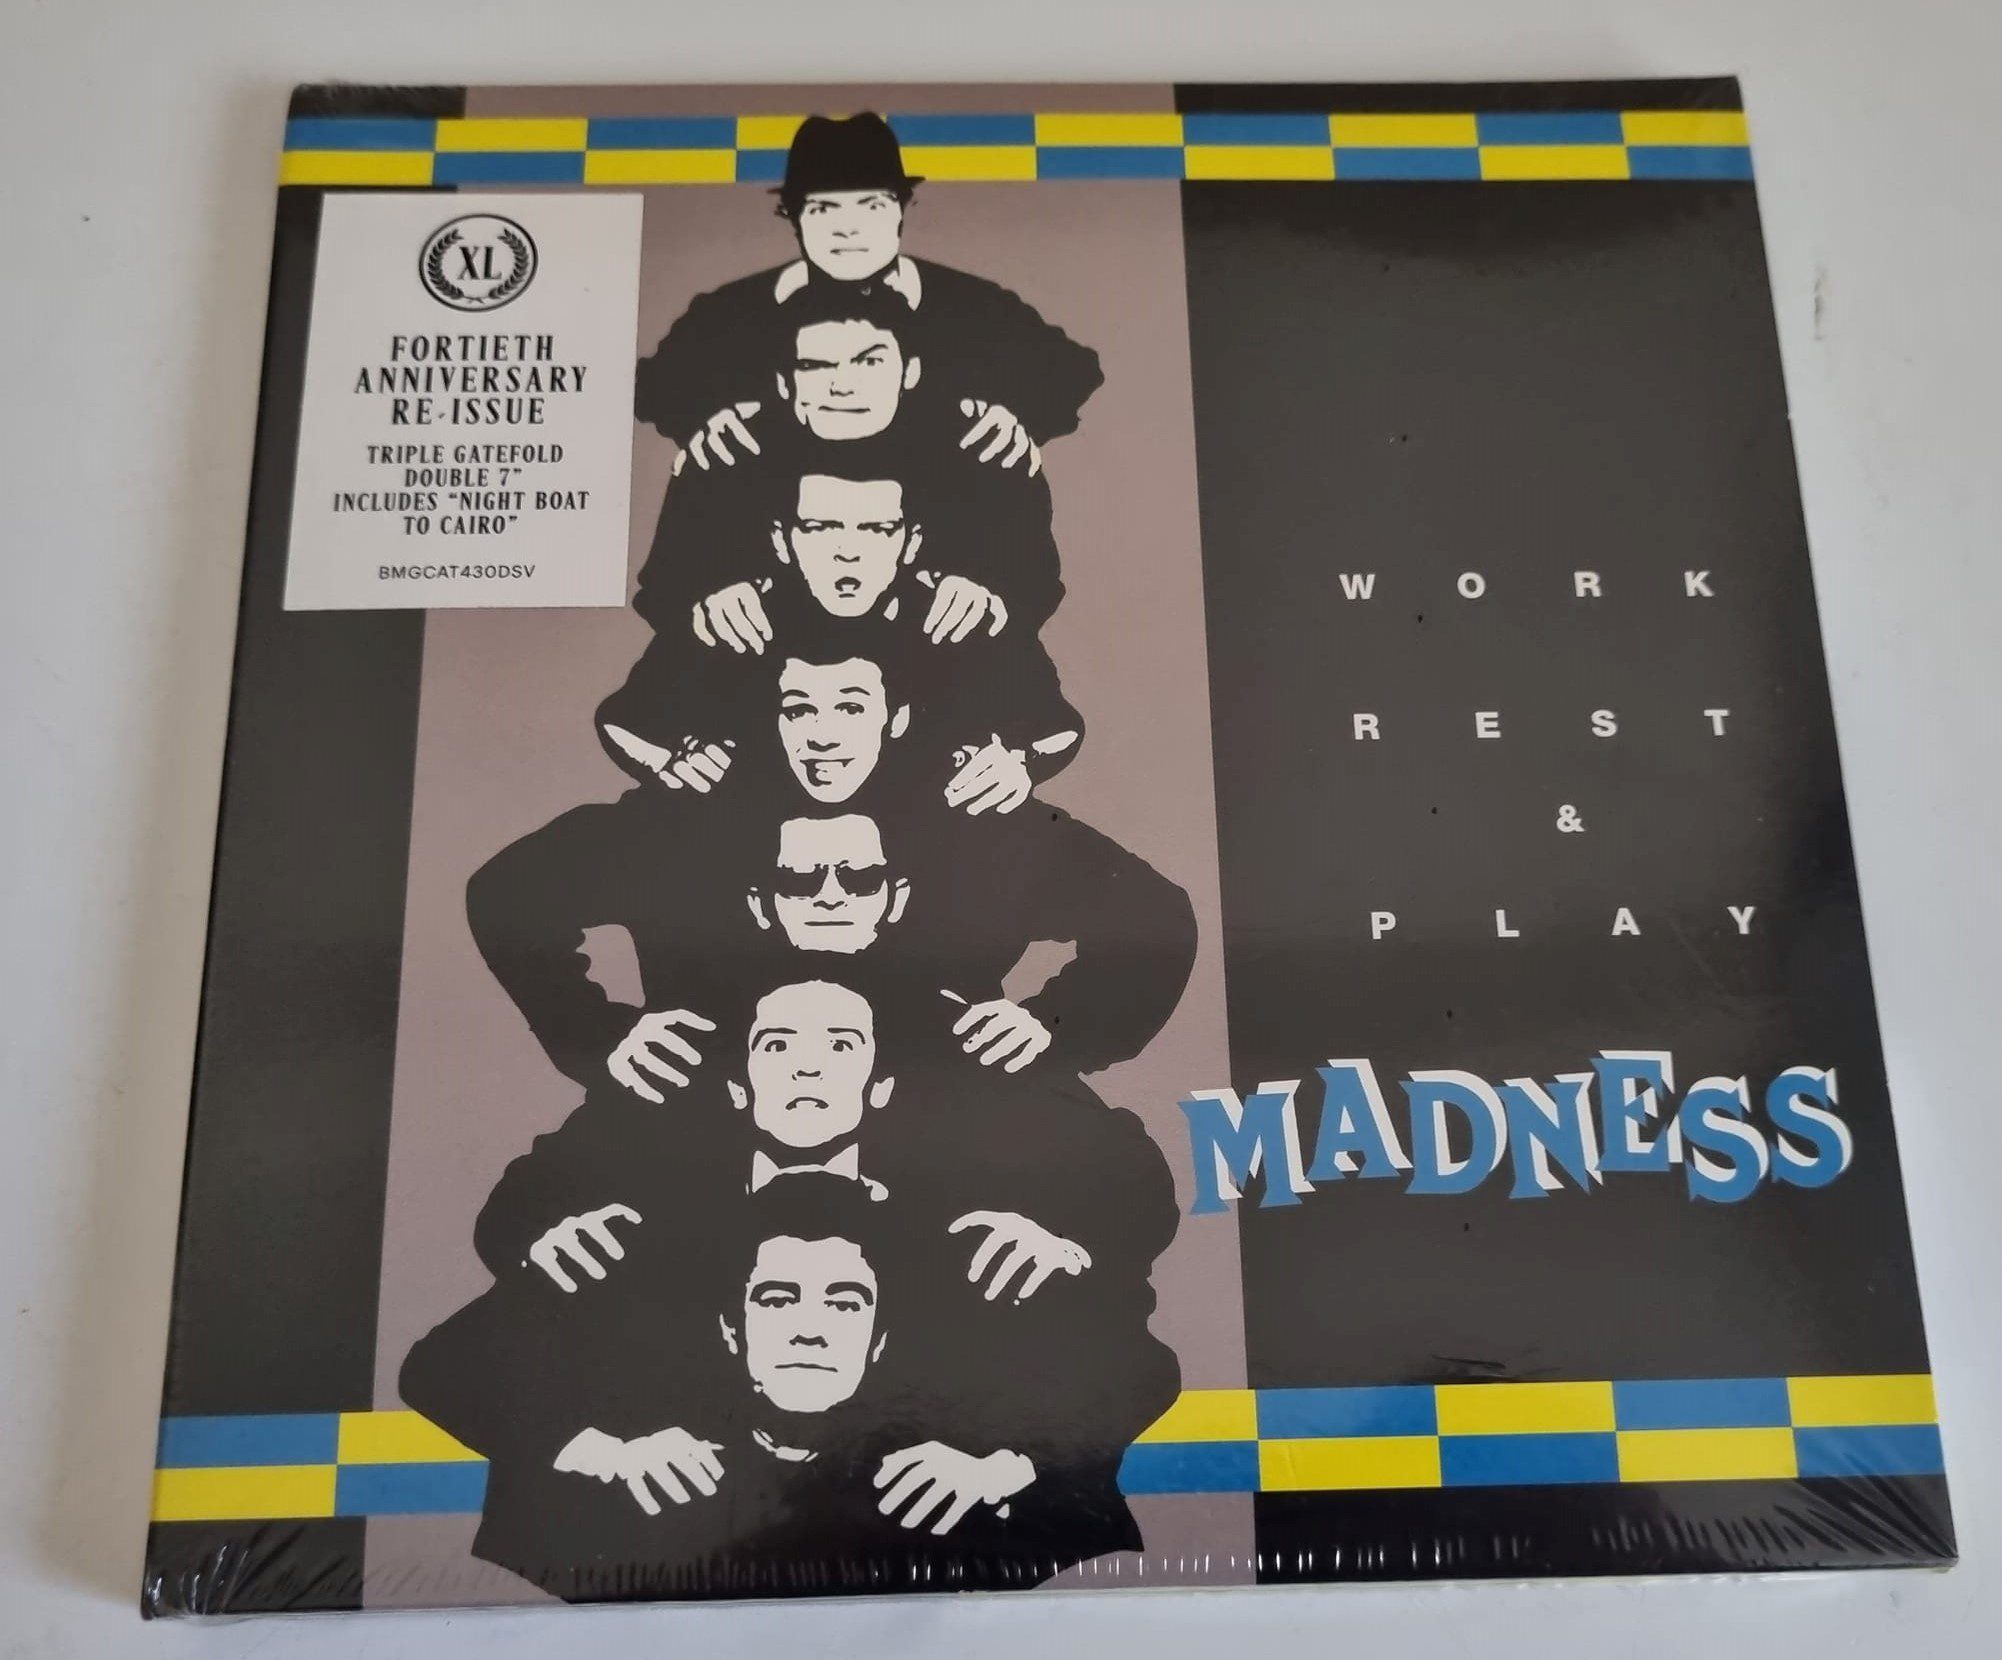 Buy this rare Madness record by clicking here